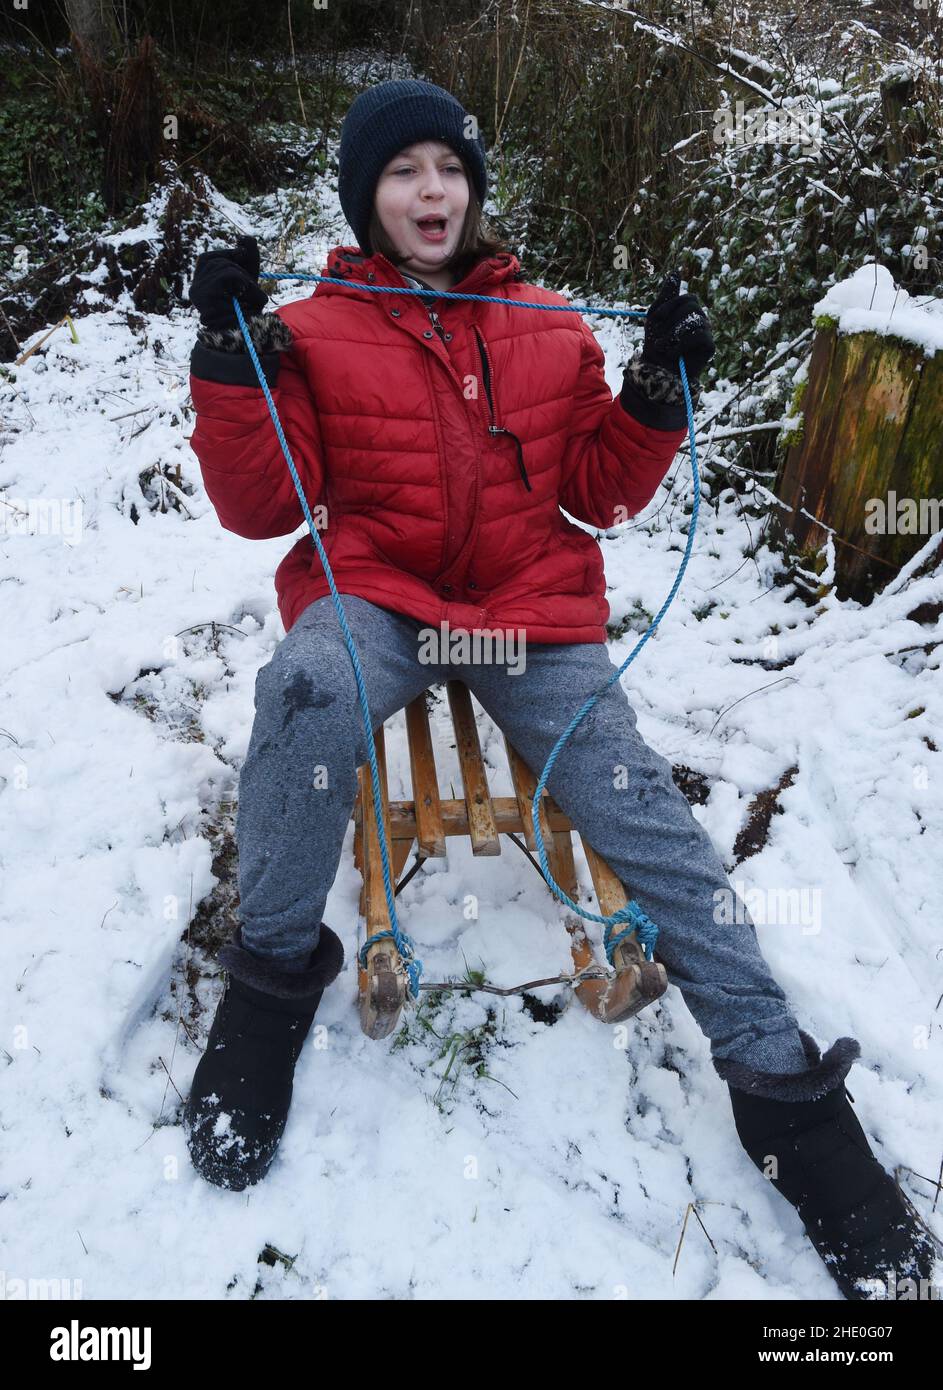 Peebles, Scottish Borders. 7th Jan 22.Snow has blanketed Scotland overnight, to the delight of 10 yr old Amelia Baggs from Edinburgh who enjoyed her winter wonderland sledging experience during a trip to Peebles in the Scottish Borders . Credit: eric mccowat/Alamy Live News Stock Photo